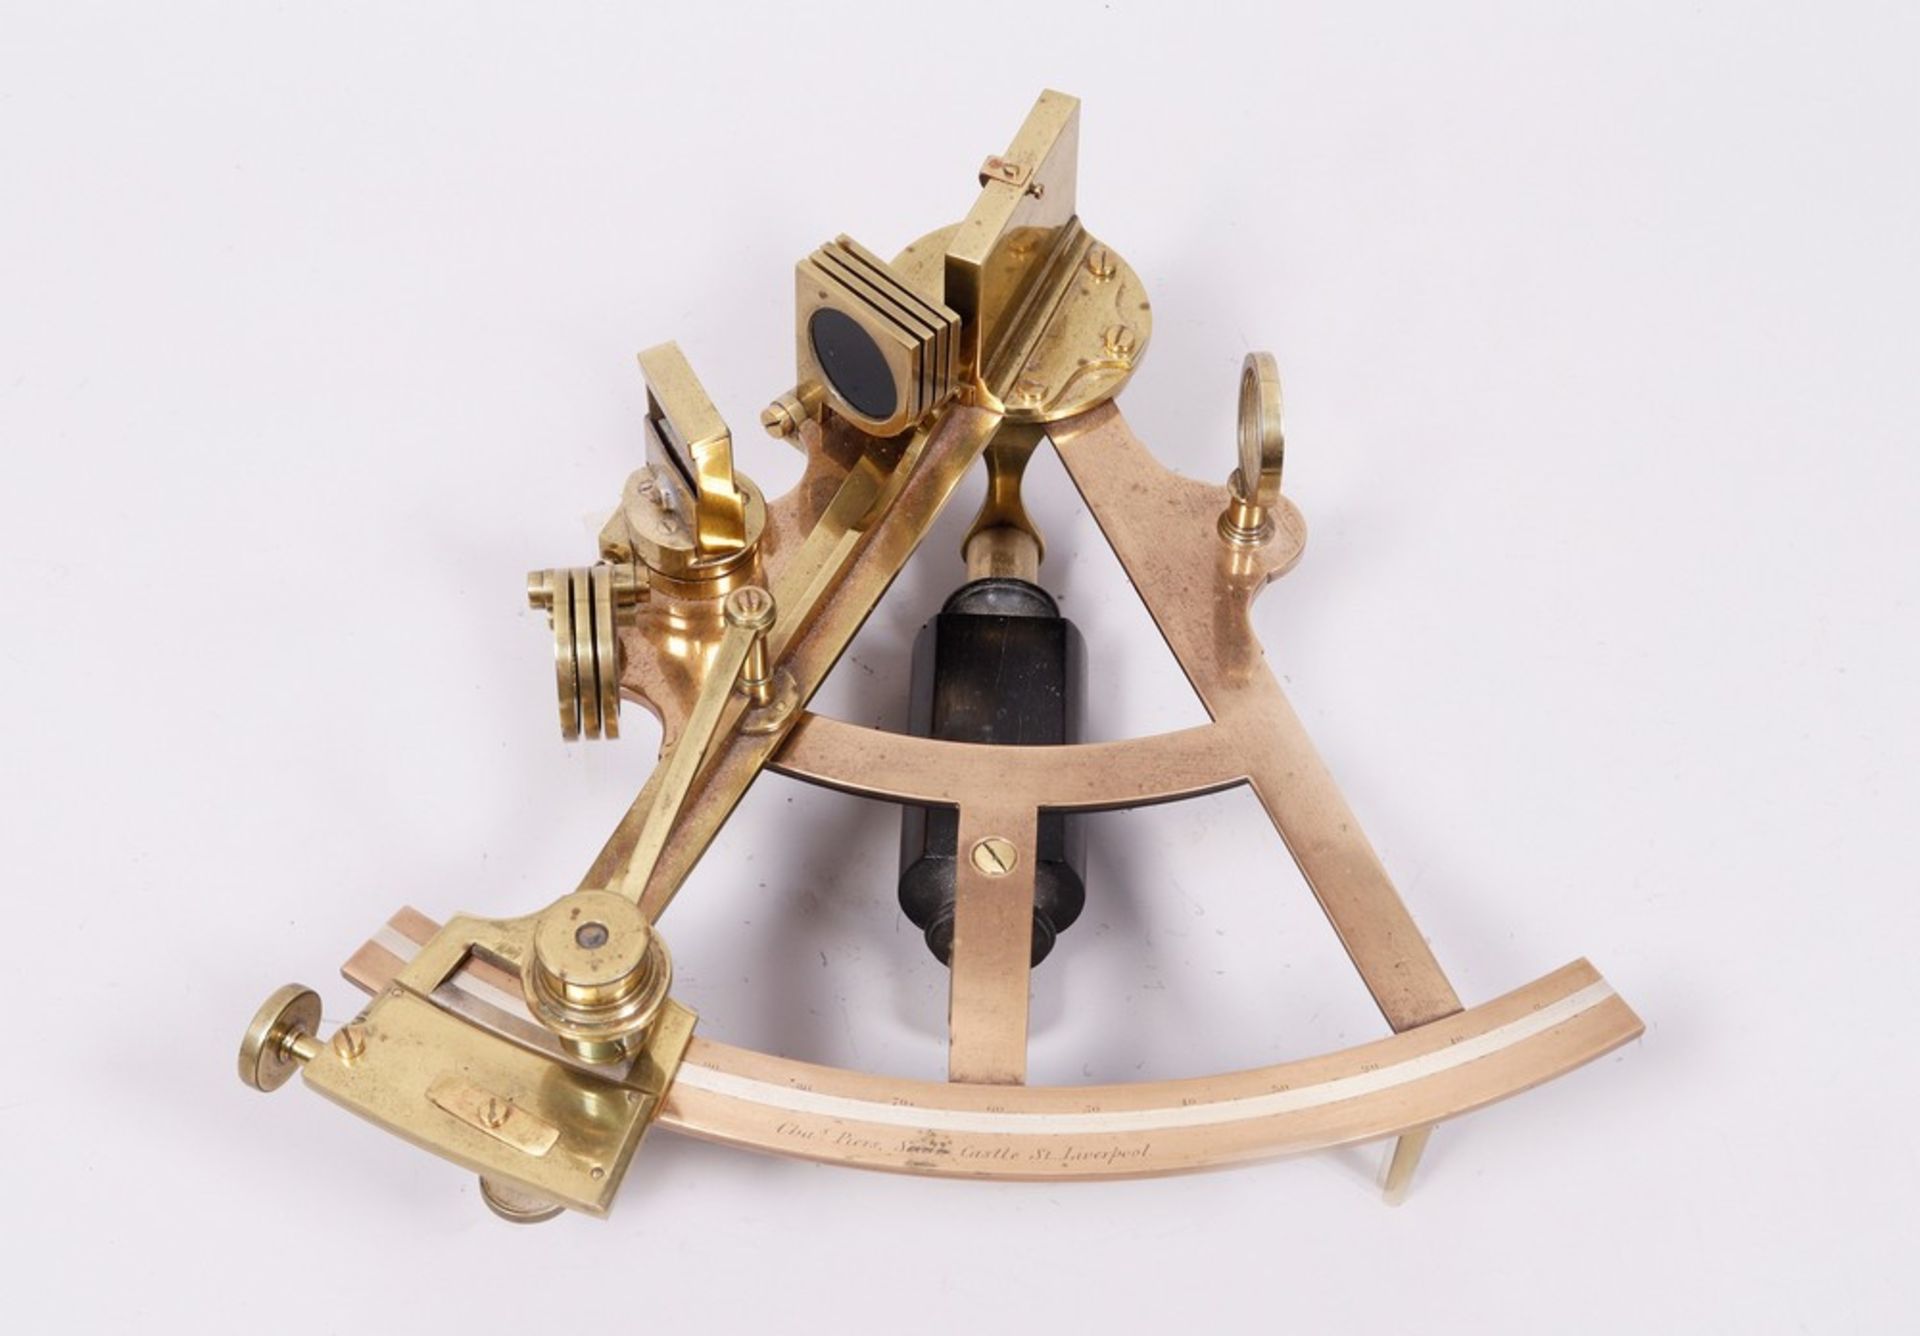 Sextant in transport box, Charles Piers, Liverpool, probably mid-19th C. - Image 2 of 4